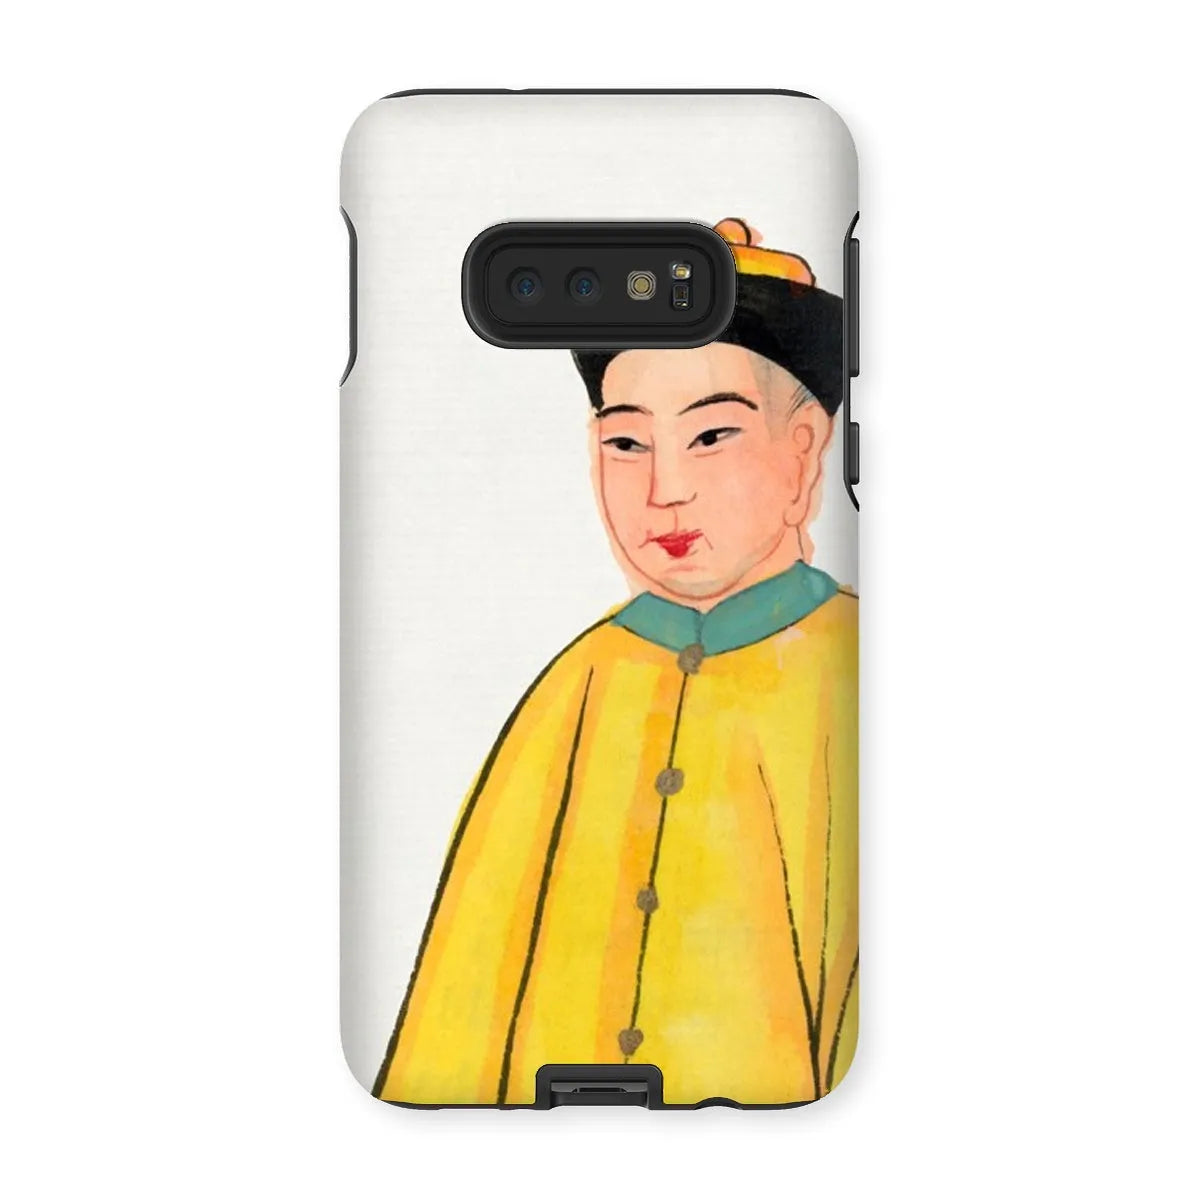 Priest In Yellow Robes - Chinese Aesthetic Art Phone Case - Samsung Galaxy S10e / Matte - Mobile Phone Cases